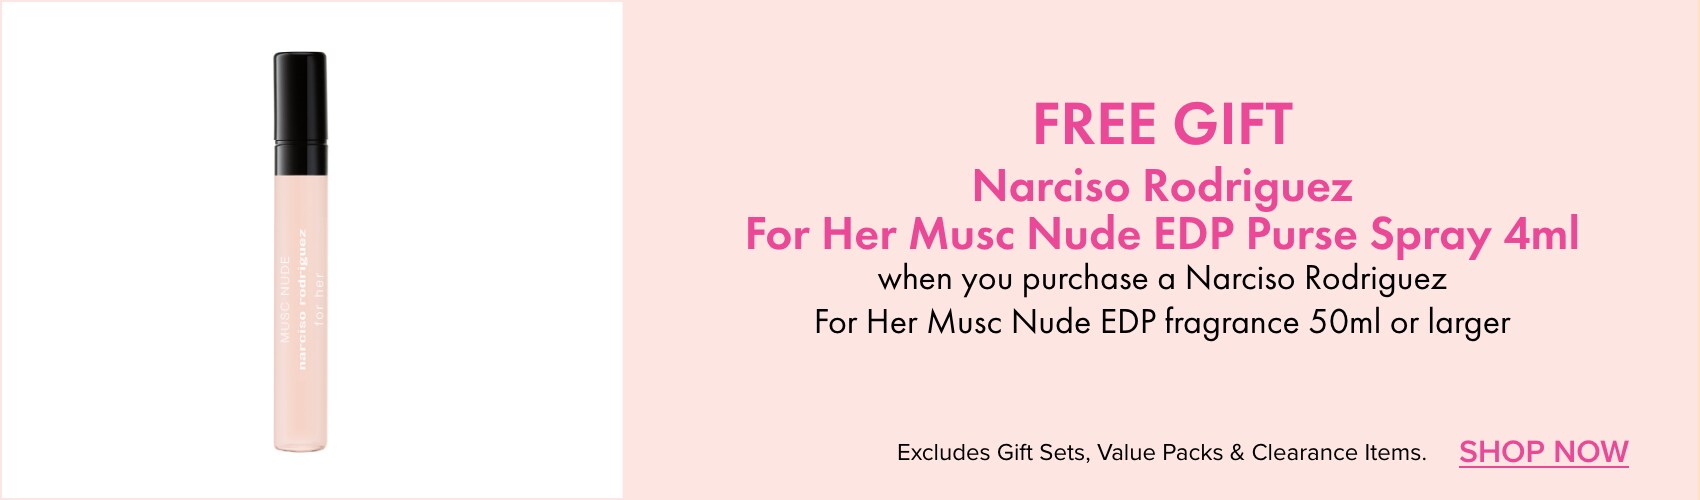 FREE GIFT Narciso Rodriguez For Her Musc Nude EDP Purse Spray 4ml when you purchase a Narciso Rodriguez For her Musc EDP 50ml or larger